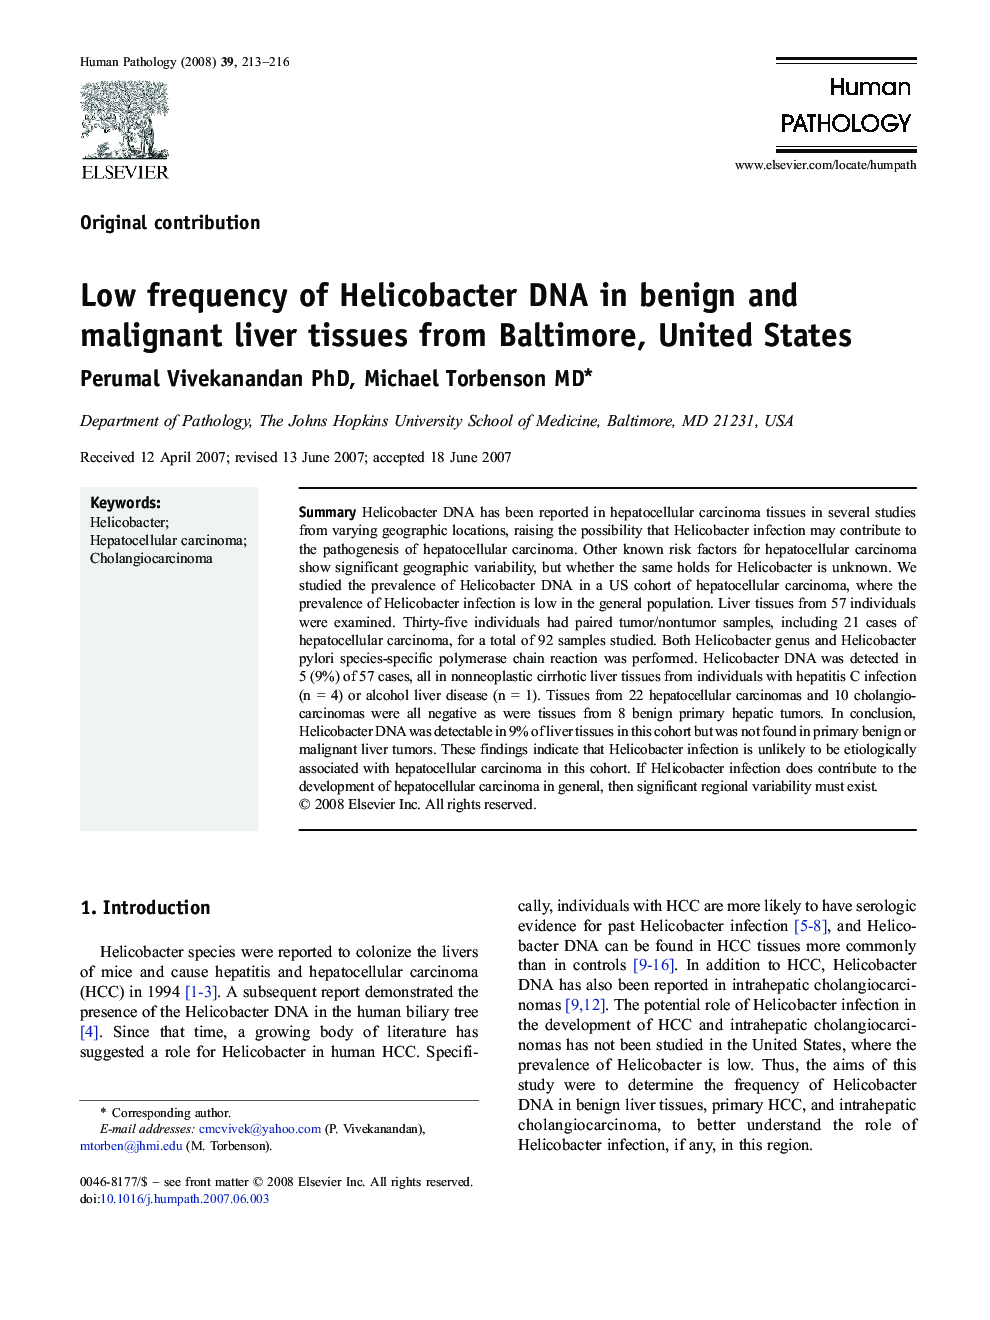 Low frequency of Helicobacter DNA in benign and malignant liver tissues from Baltimore, United States